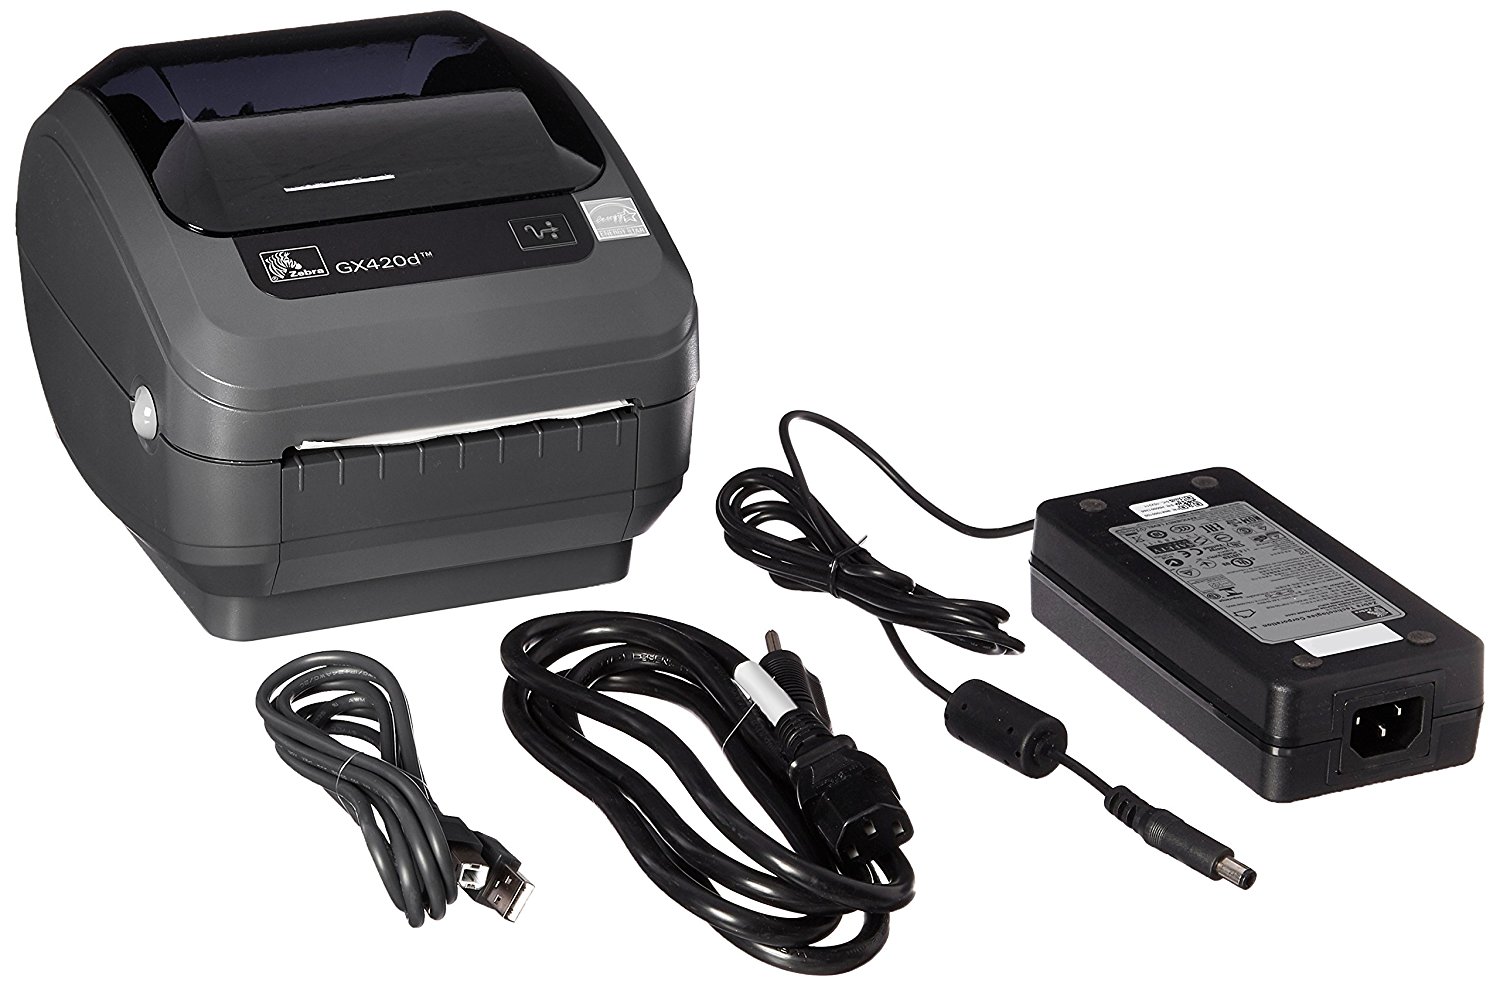 Zebra Gx420d Monochrome Desktop Direct Thermal Label Printer With Fast Ethernet Technology 6 In 0294